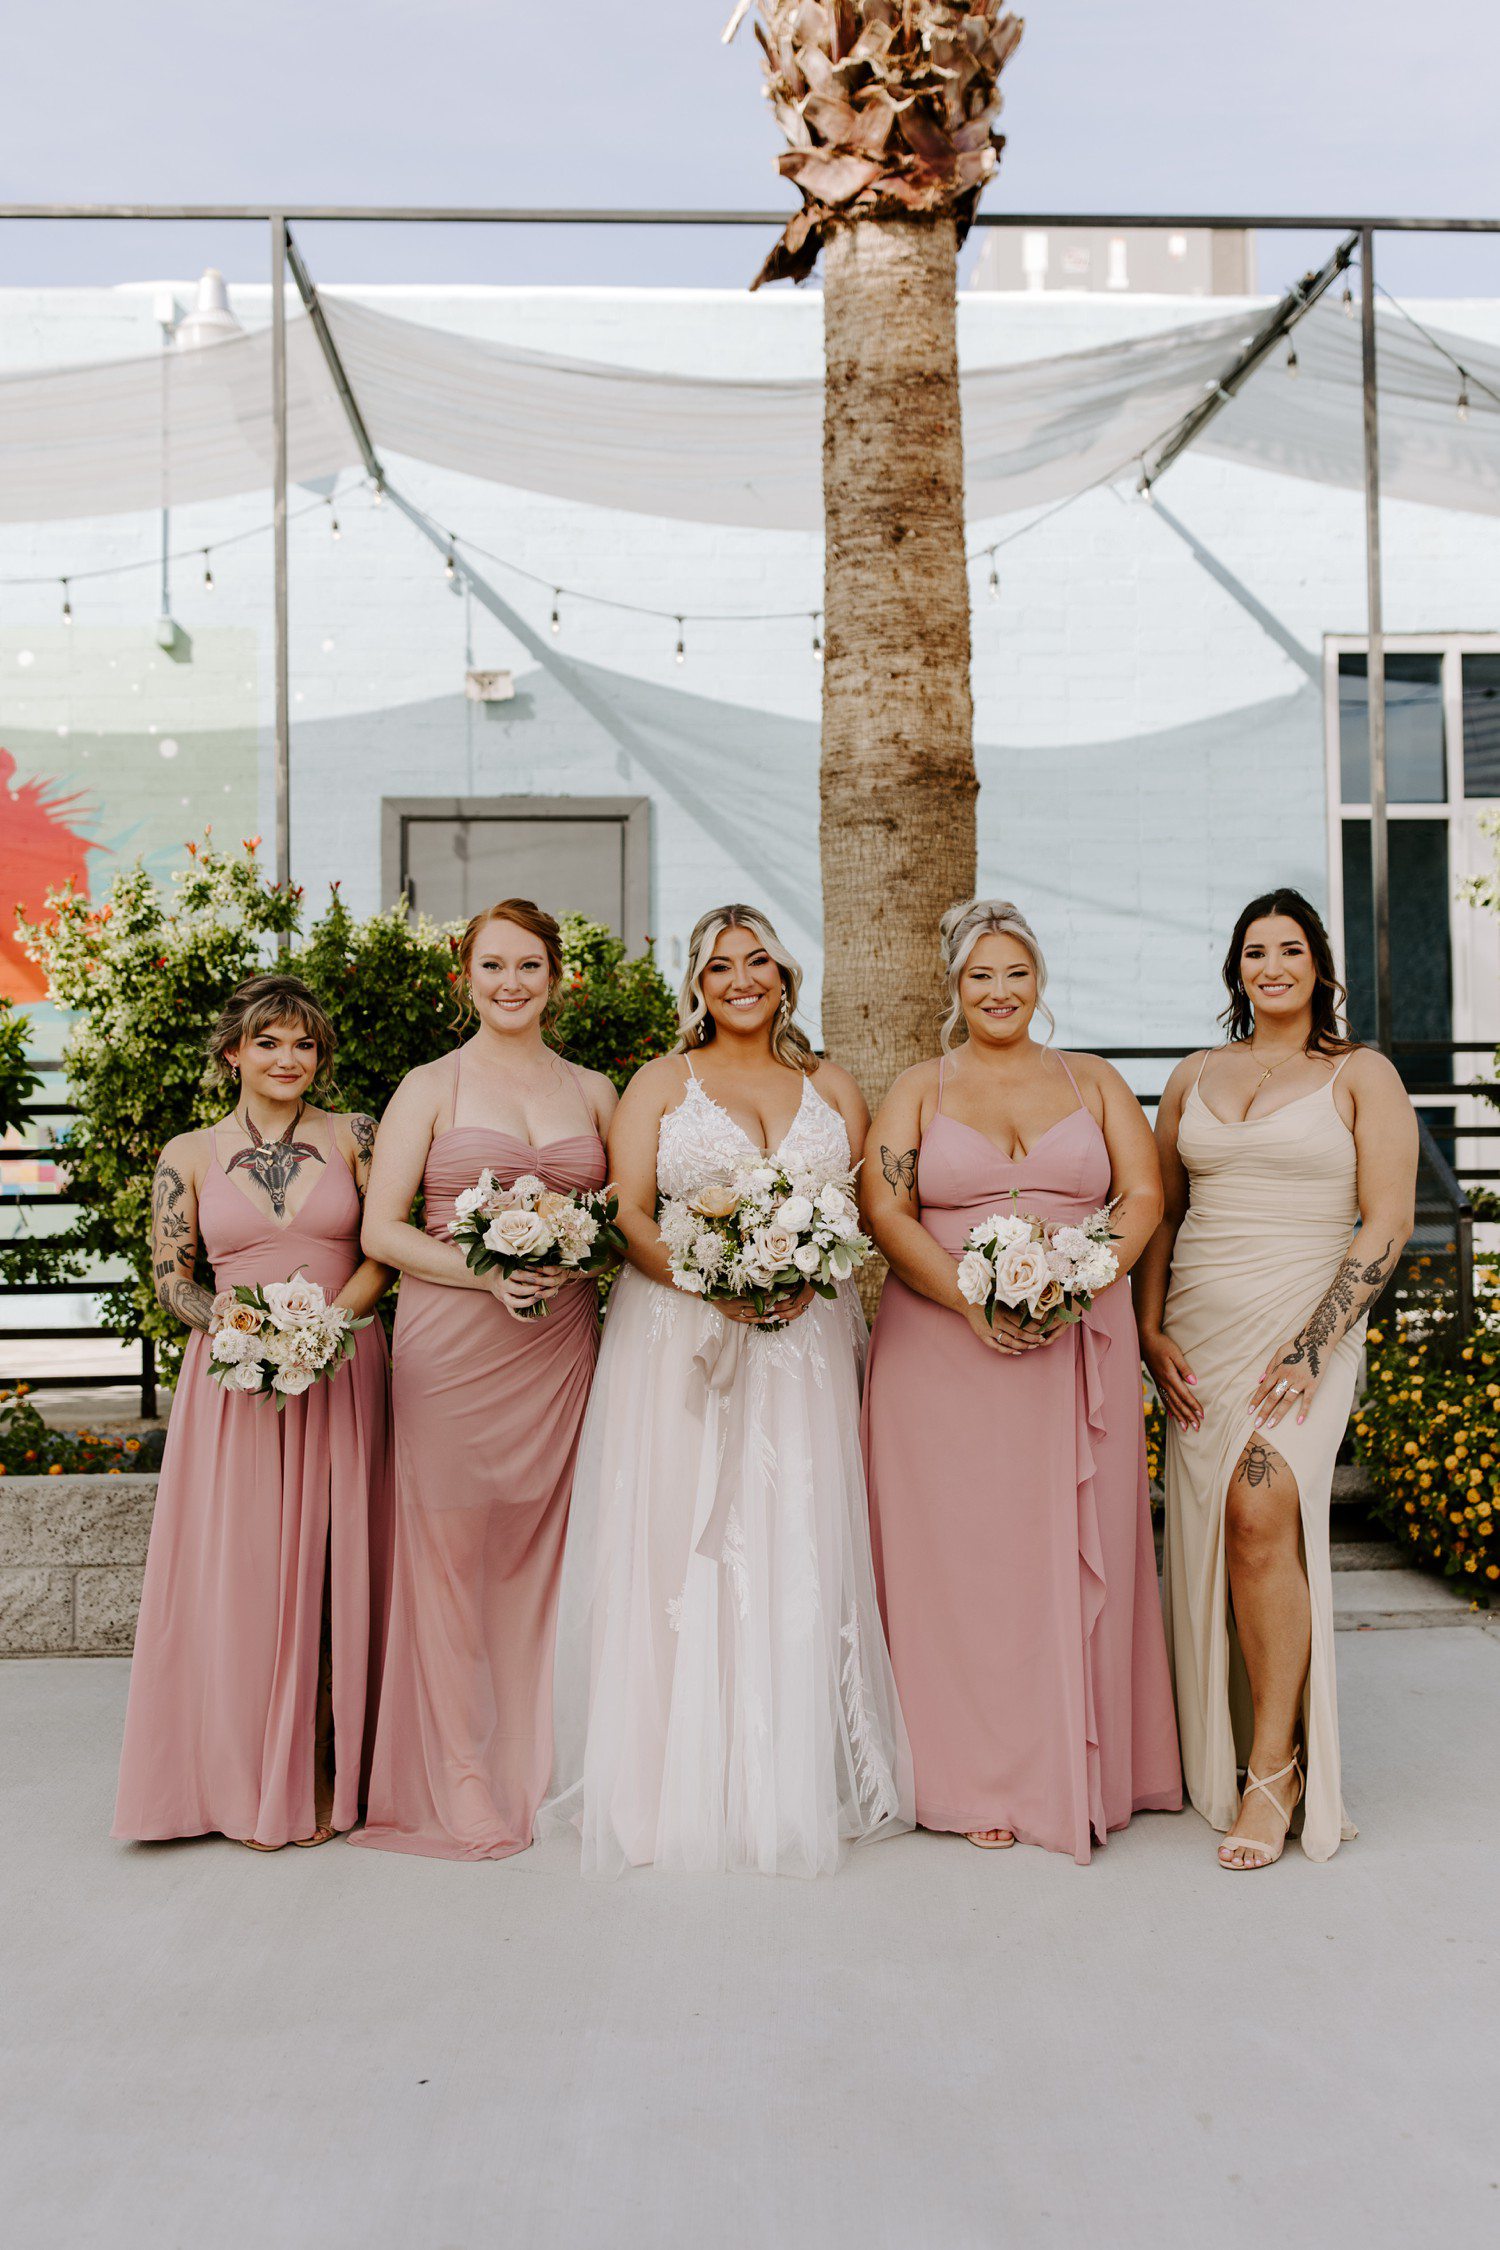 Bride and bridesmaids wearing mauve pink dresses with bouquets.